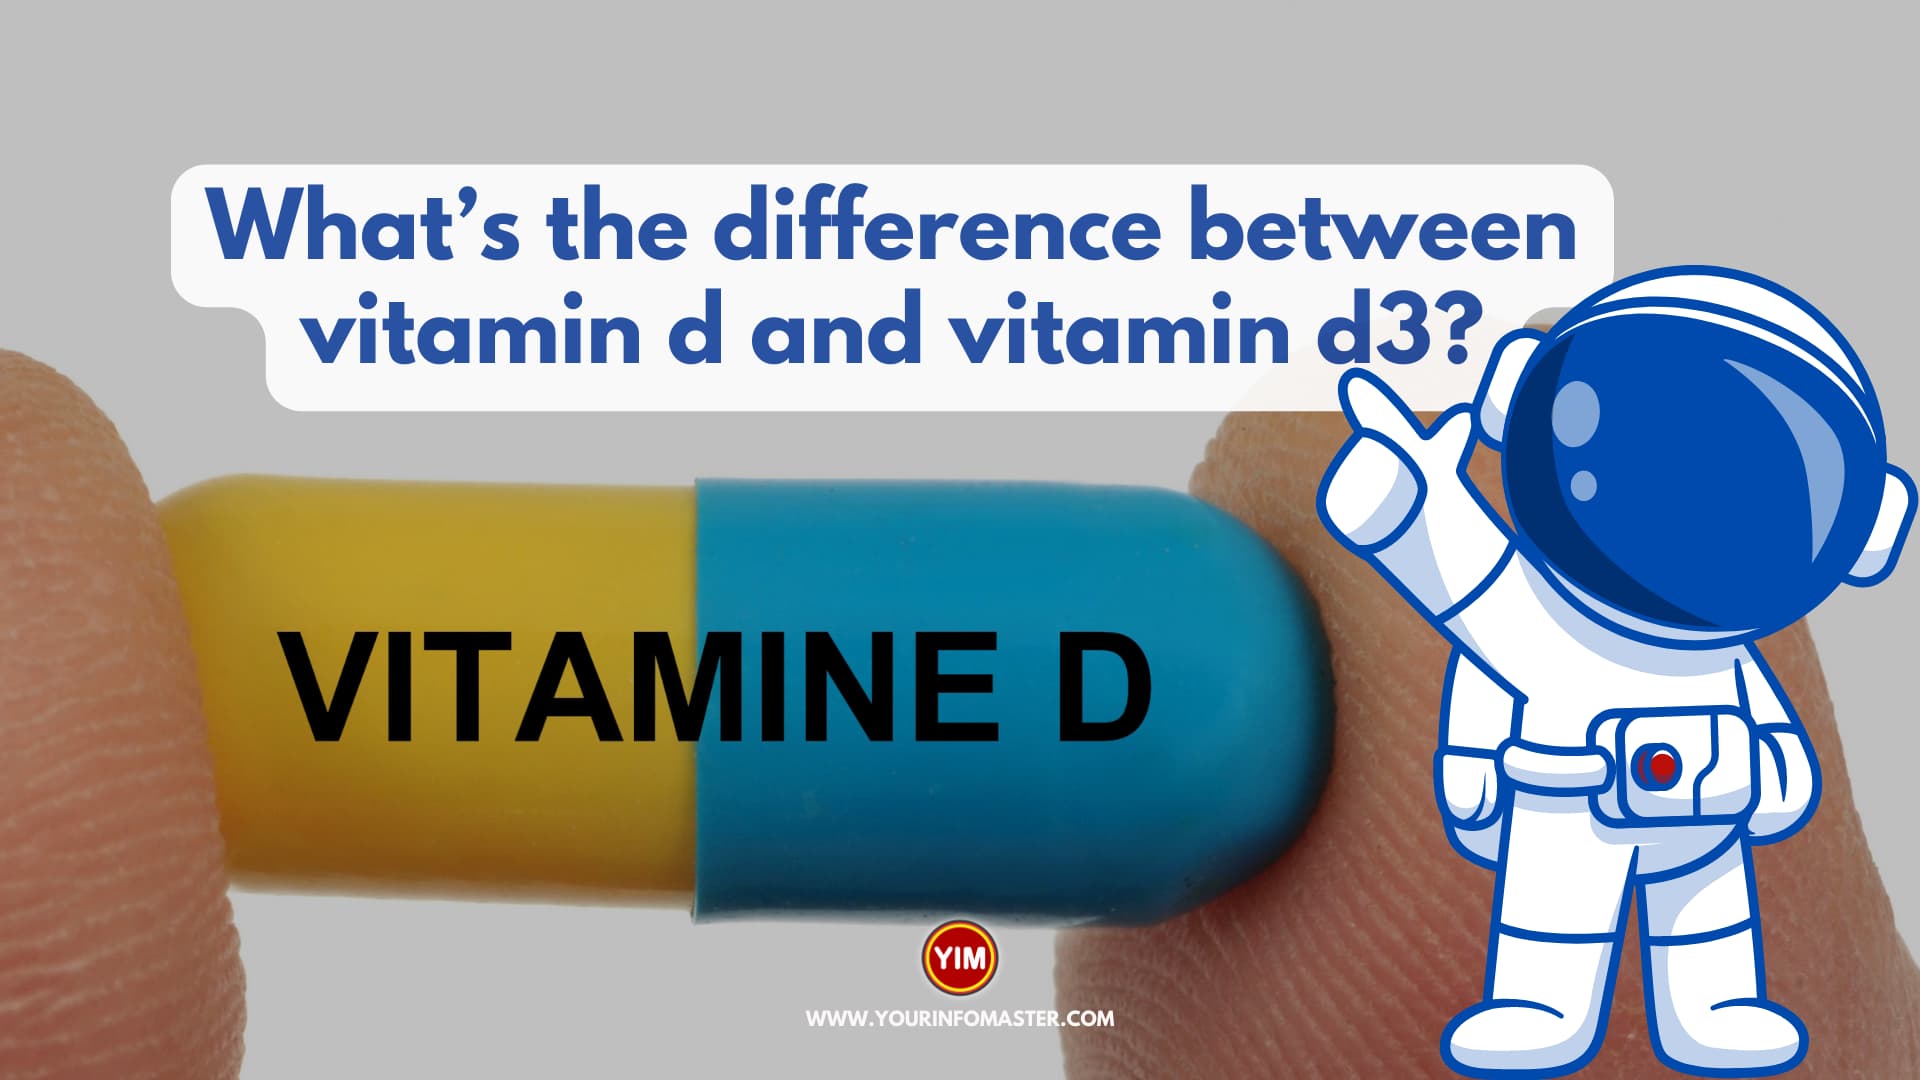 What is the difference between vitamin d and vitamin d3